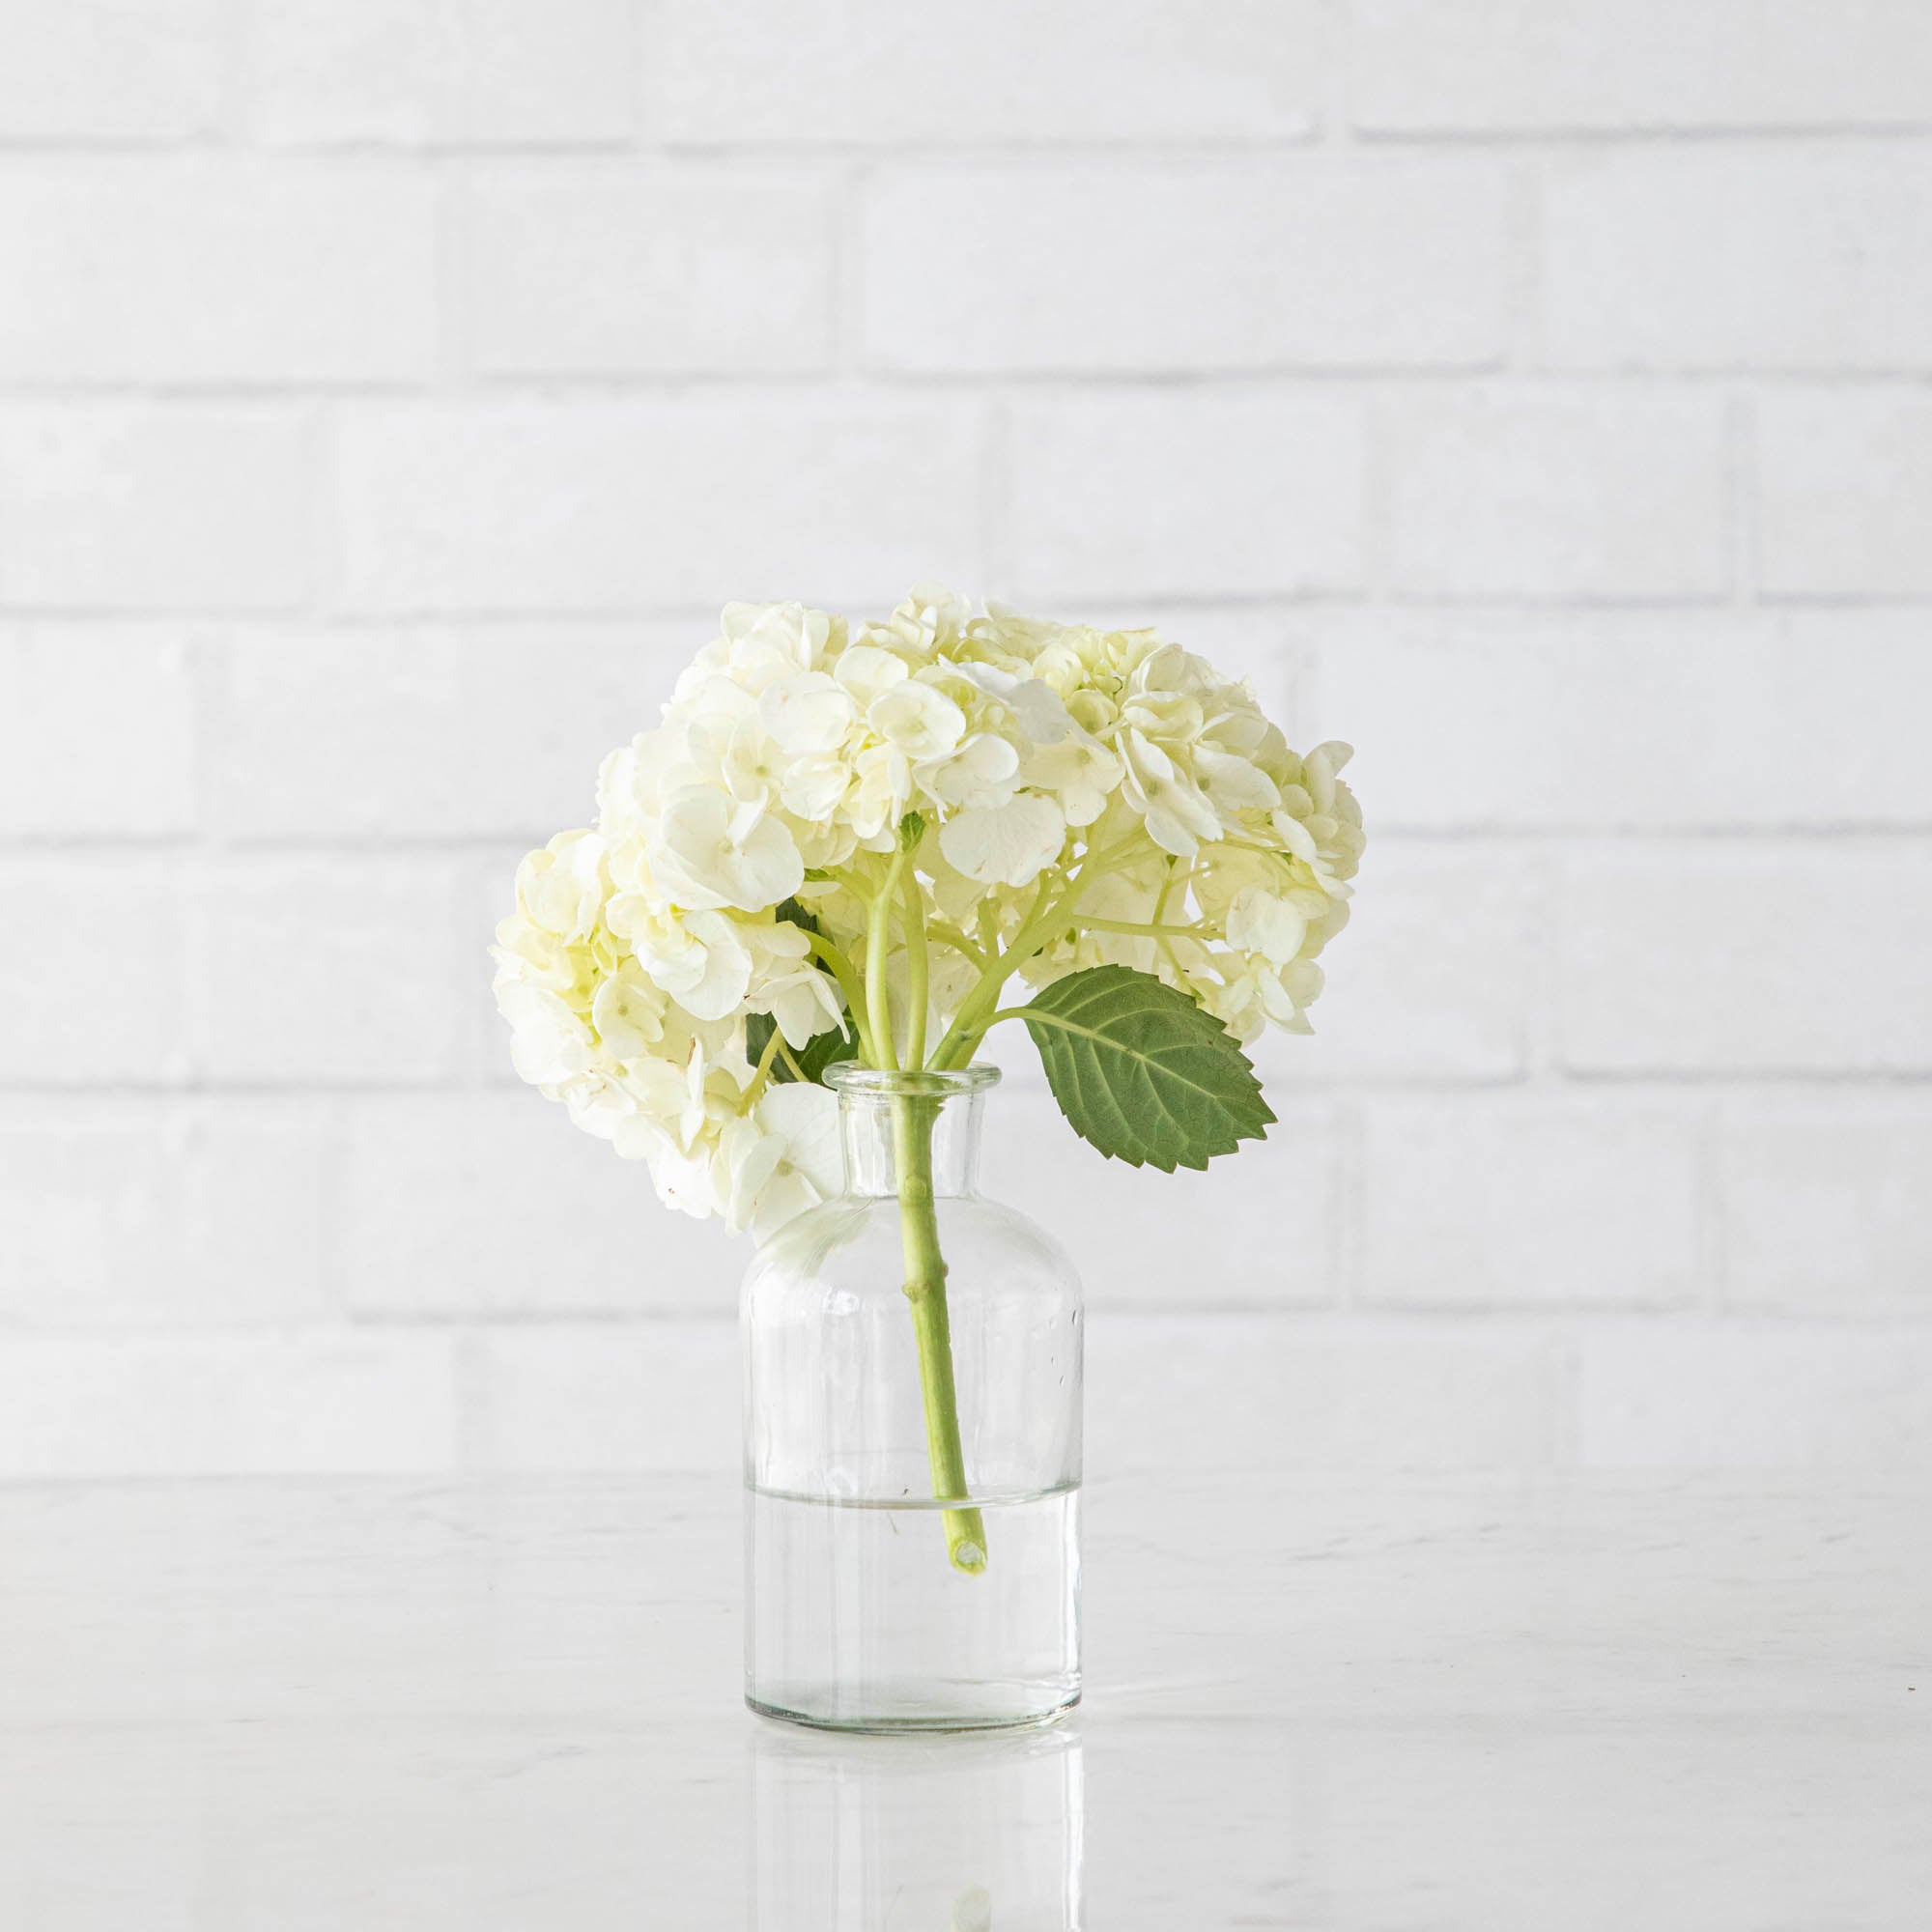 Three Bottleneck Bud Vases from Accent Decor with white flowers in them.